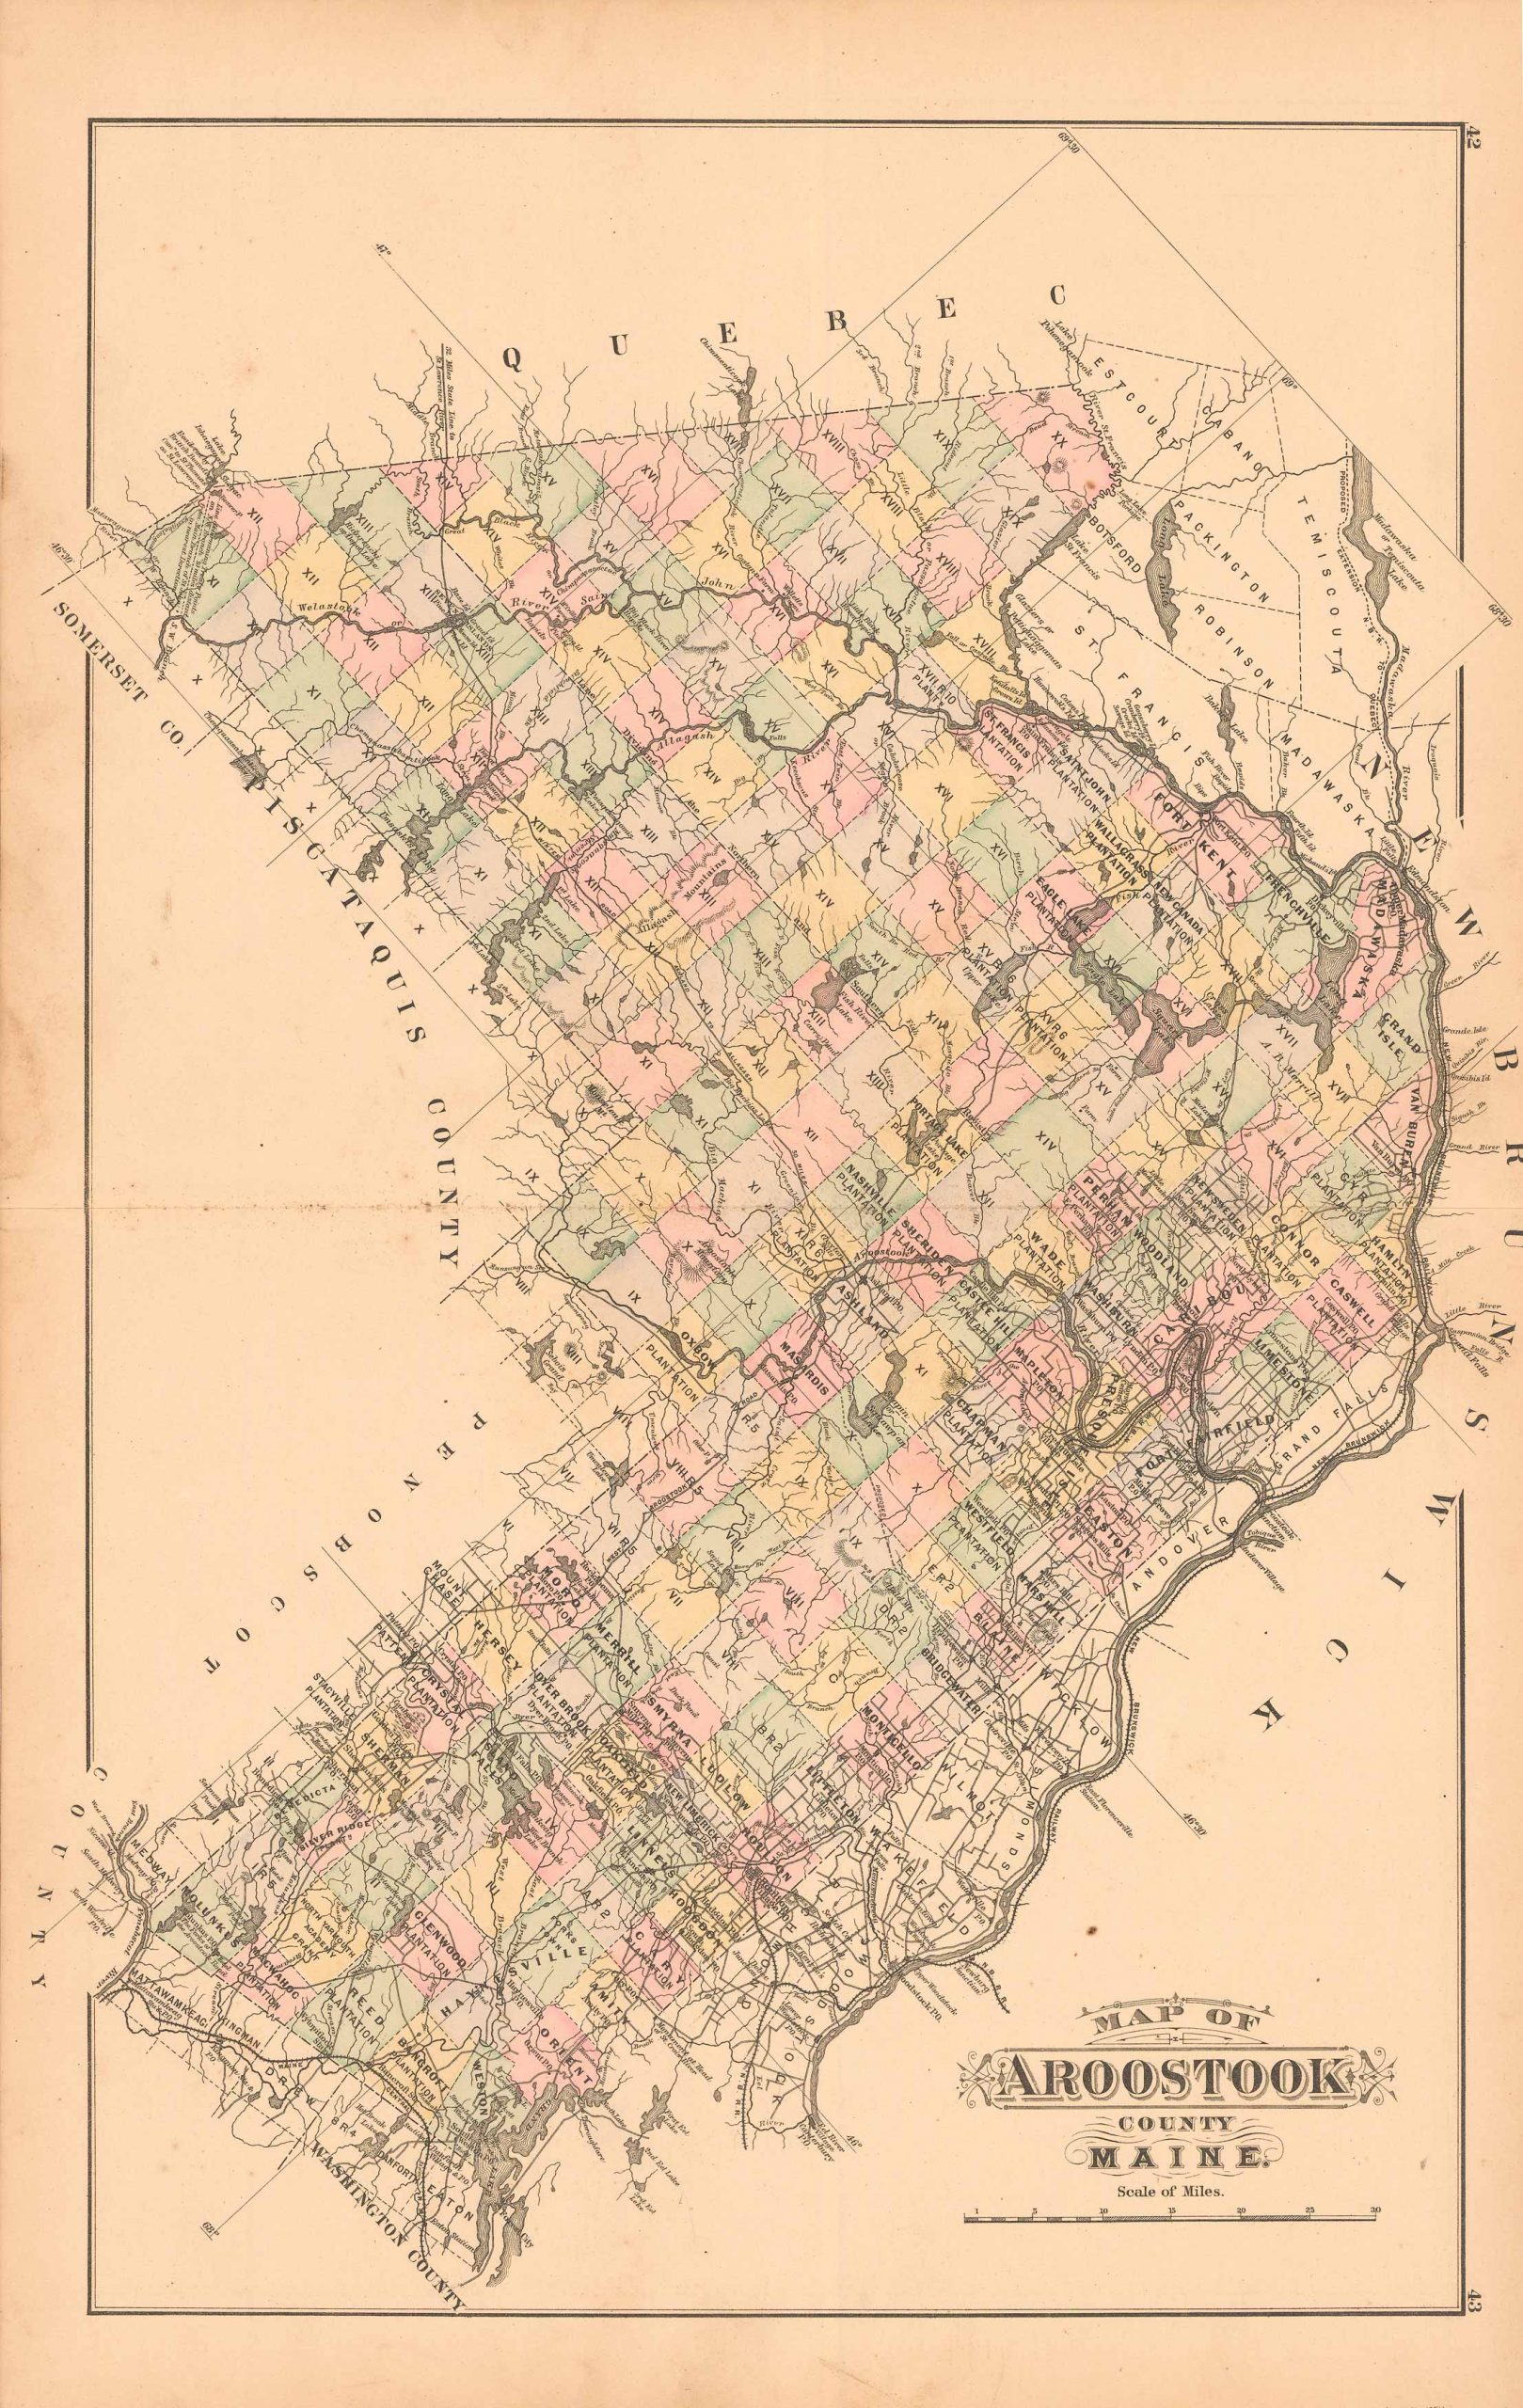 Colby's 1884 Map of Aroostook County, Maine Art Source International